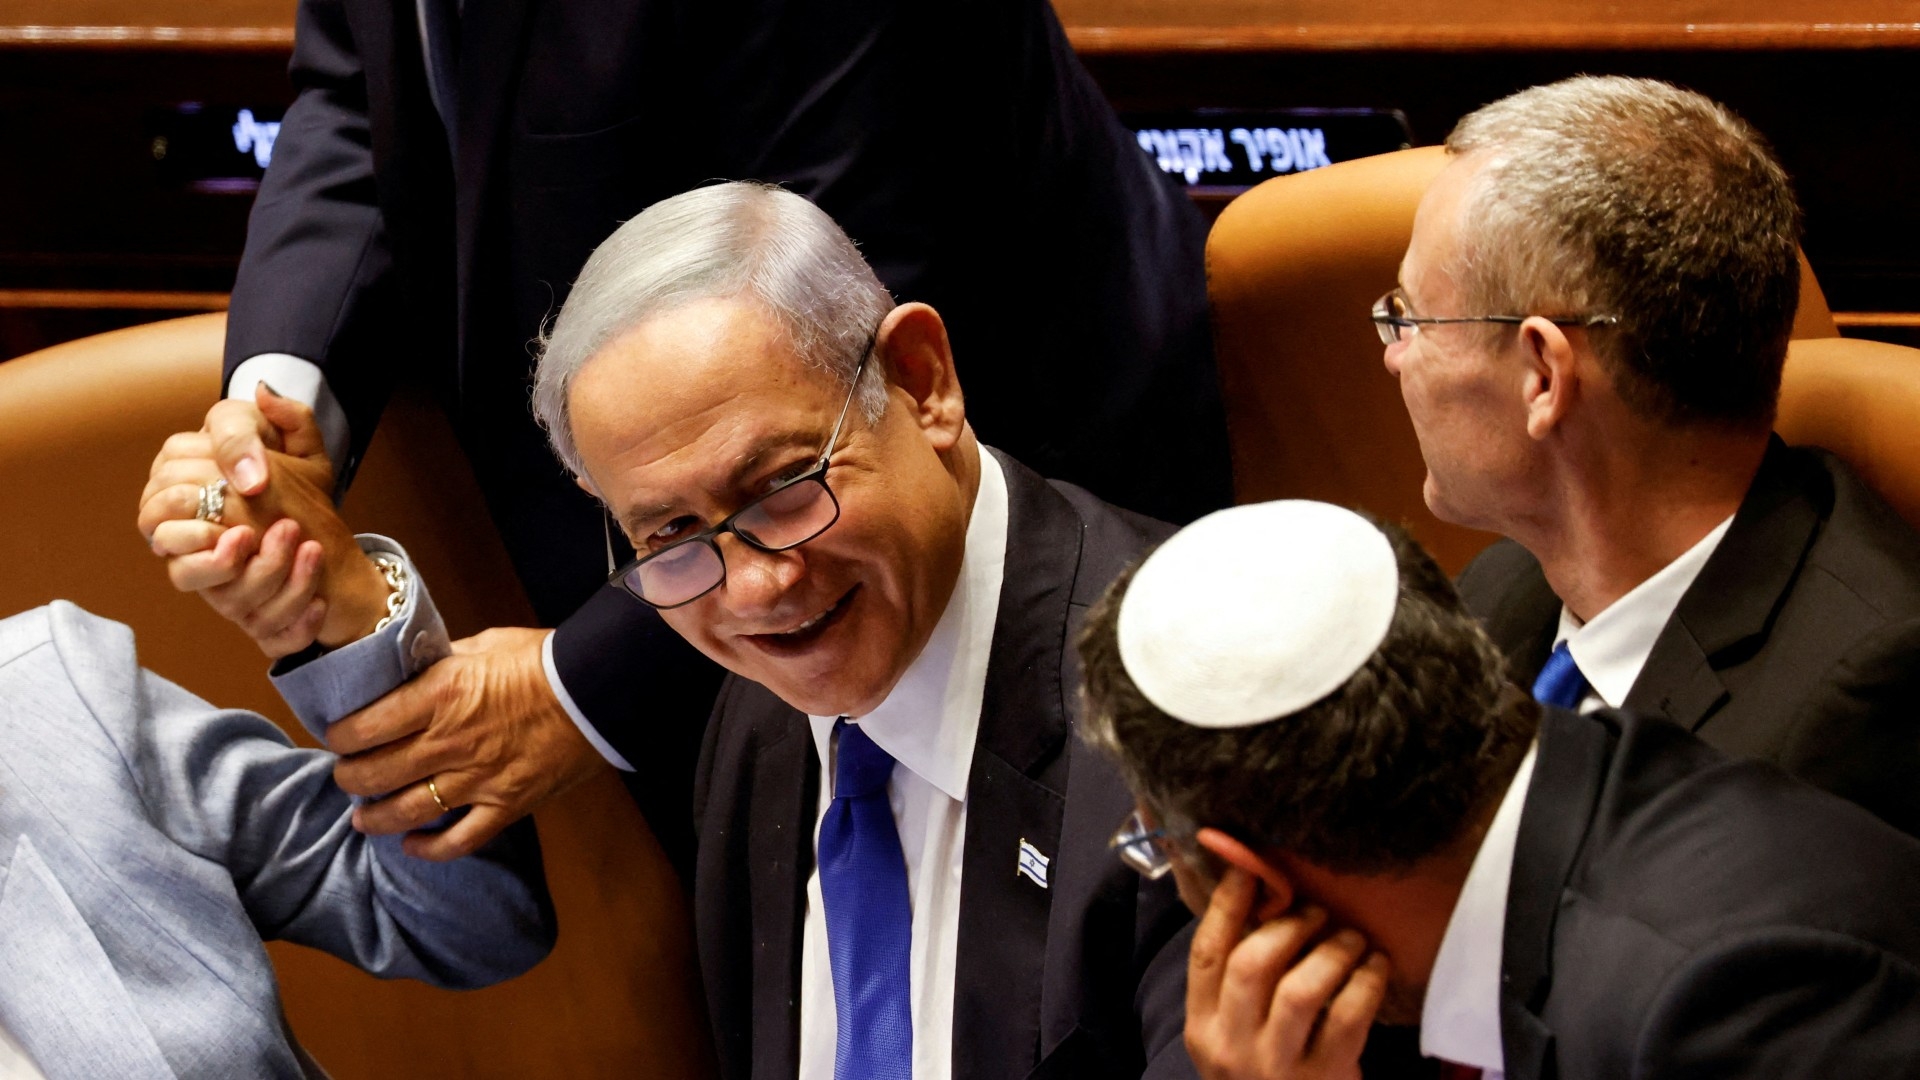 Israeli Prime Minister Benjamin Netanyahu and lawmakers gather at the Knesset plenum to vote on a bill to limit some Supreme Court power, in Jerusalem 24 July (Reuters)